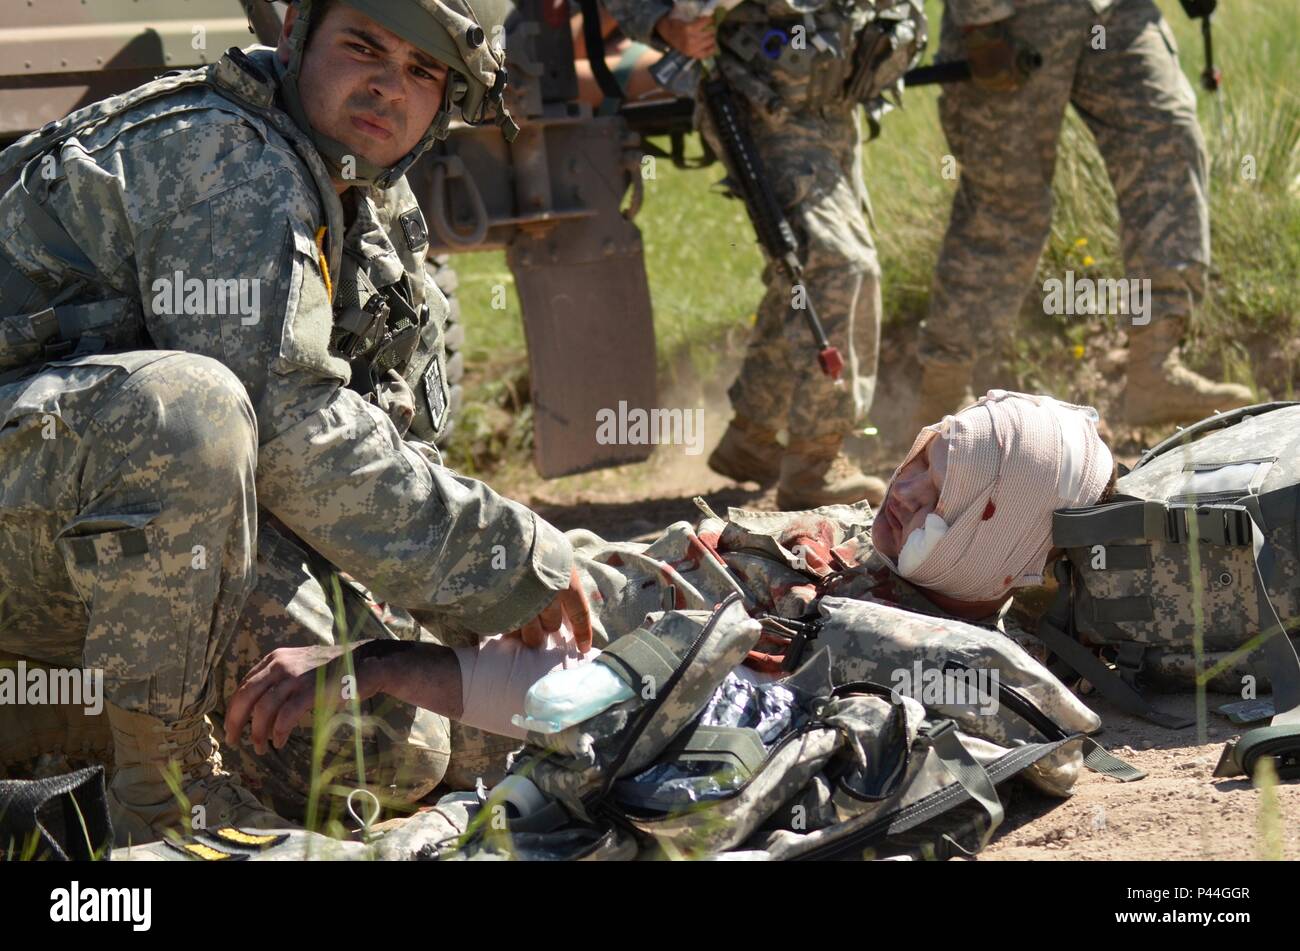 A U.S. Army Soldier of the 396th Medical Company (Ground Ambulance), Army Reserve tends to a casualty while awaiting a medical evacuation during a simulated convoy ambush in support of the Golden Coyote exercise in Camp Guernsey, Wyo., June 15th, 2016. The Golden Coyote exercise is a three-phase, scenario-driven exercise conducted in the Black Hills of South Dakota and Wyoming, which enables commanders to focus on mission essential task requirements, warrior tasks and battle drills. (U.S. Army photo by Pfc. Michael Britt/Not Released) Stock Photo